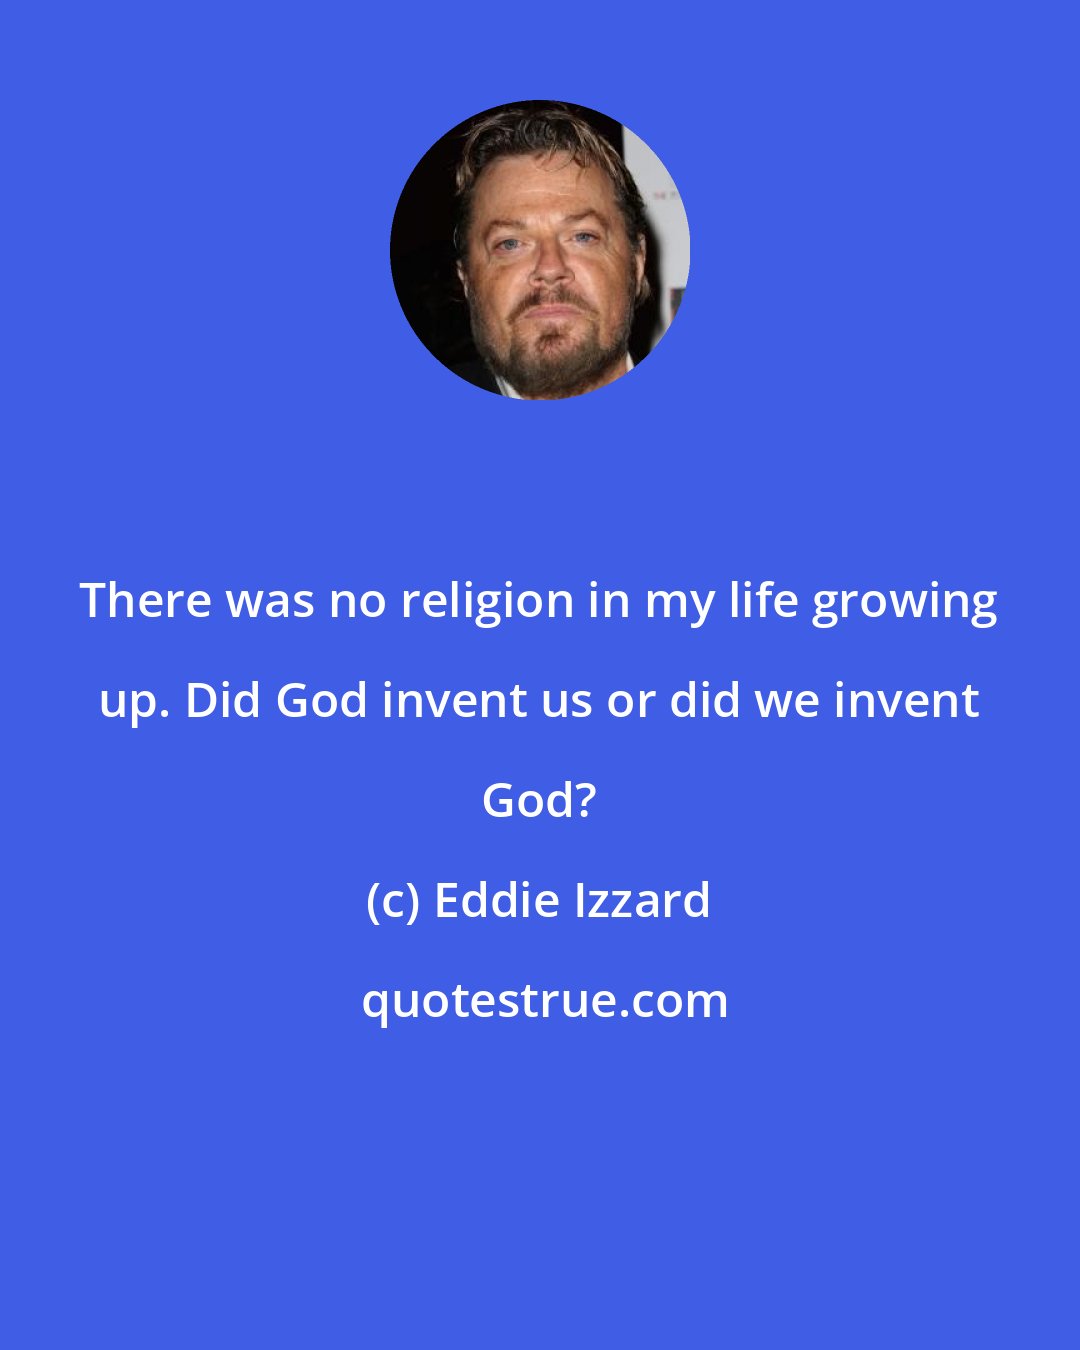 Eddie Izzard: There was no religion in my life growing up. Did God invent us or did we invent God?